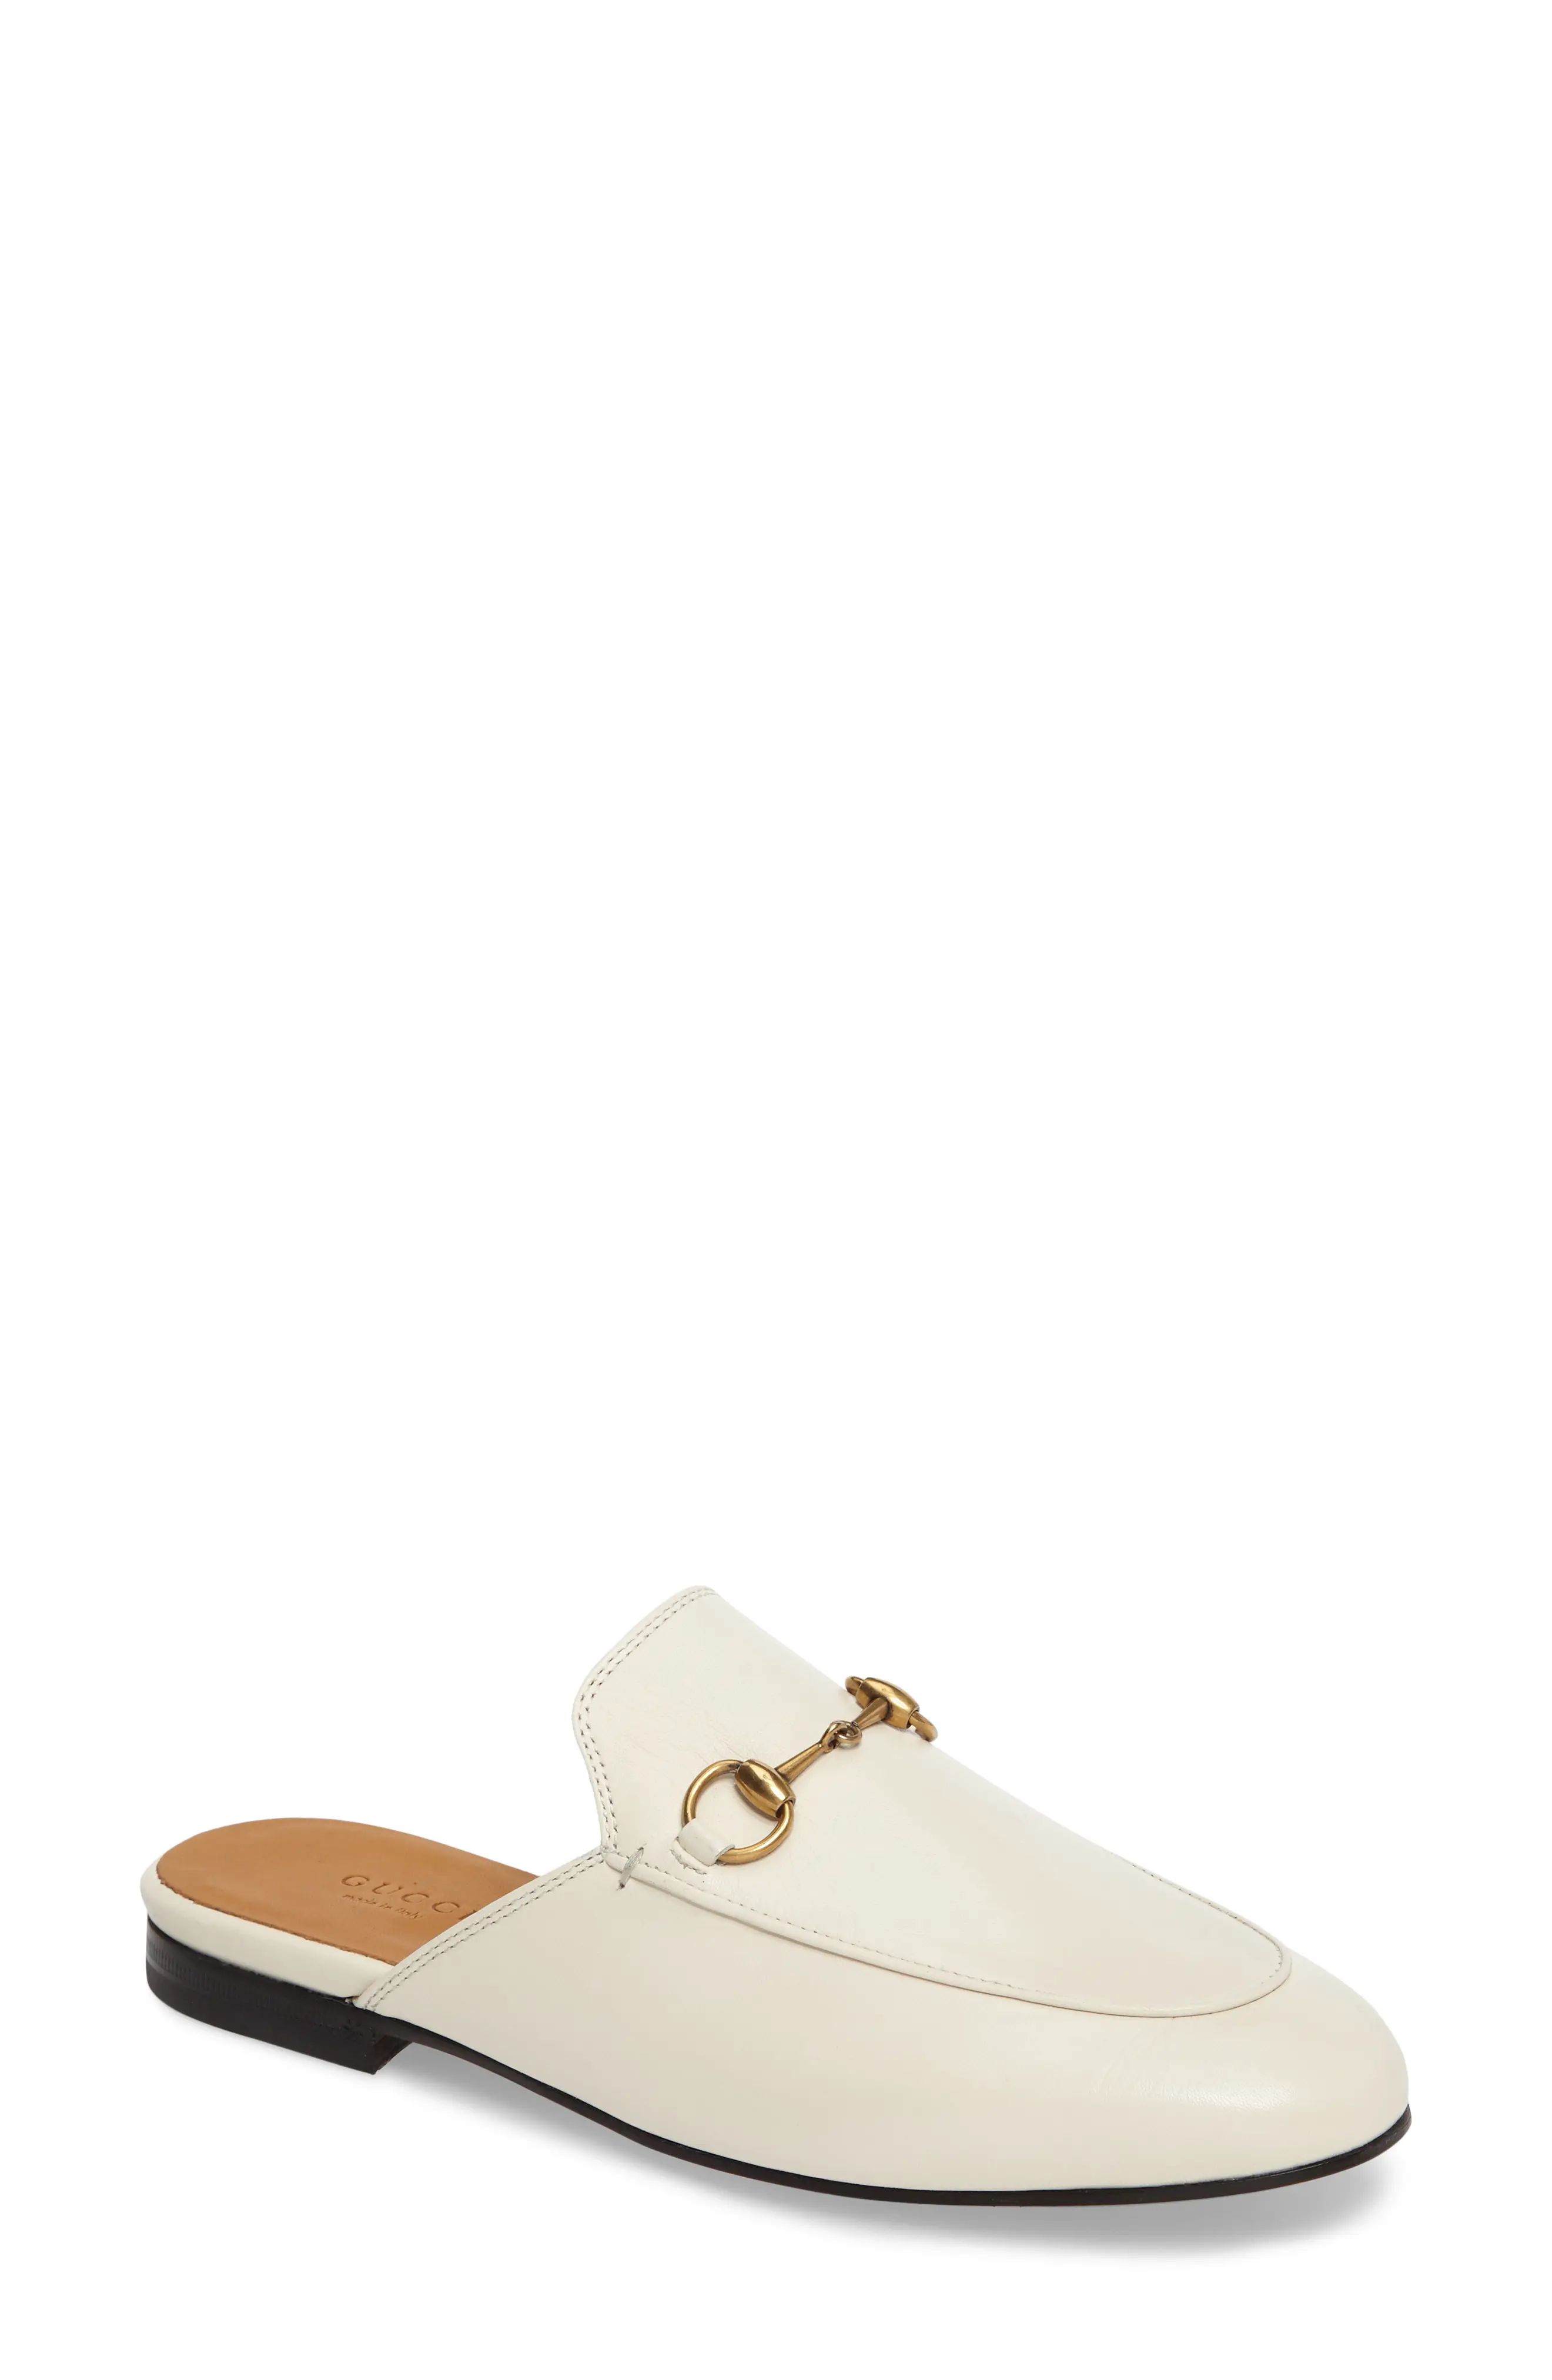 Women's Gucci Princetown Loafer Mule, Size 6.5US - White | Nordstrom